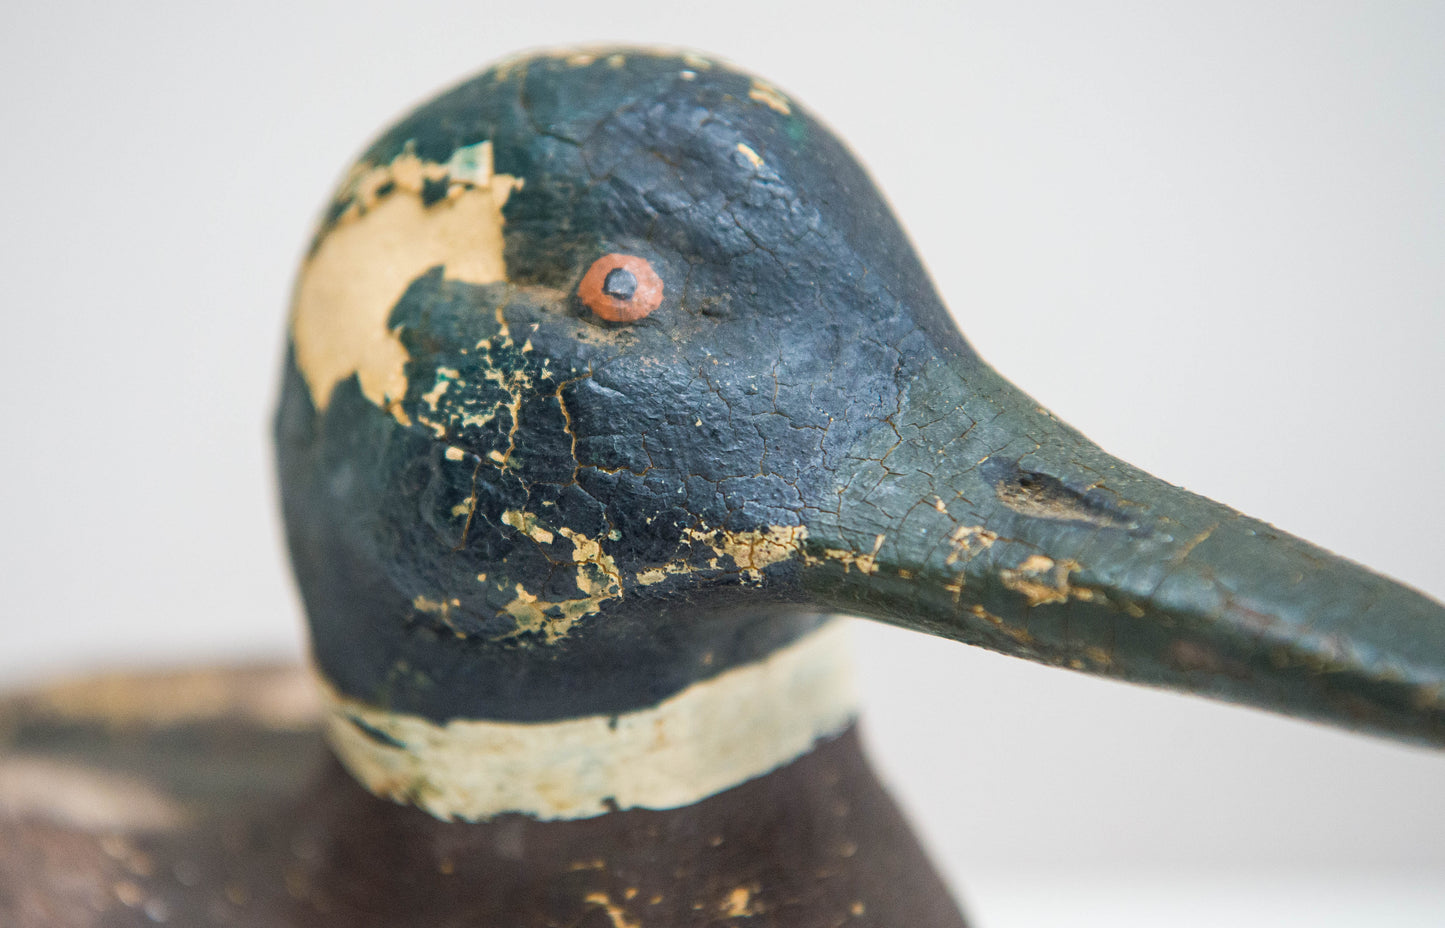 An Early English Hand made Polychrome Duck Decoy of Plaster construction.